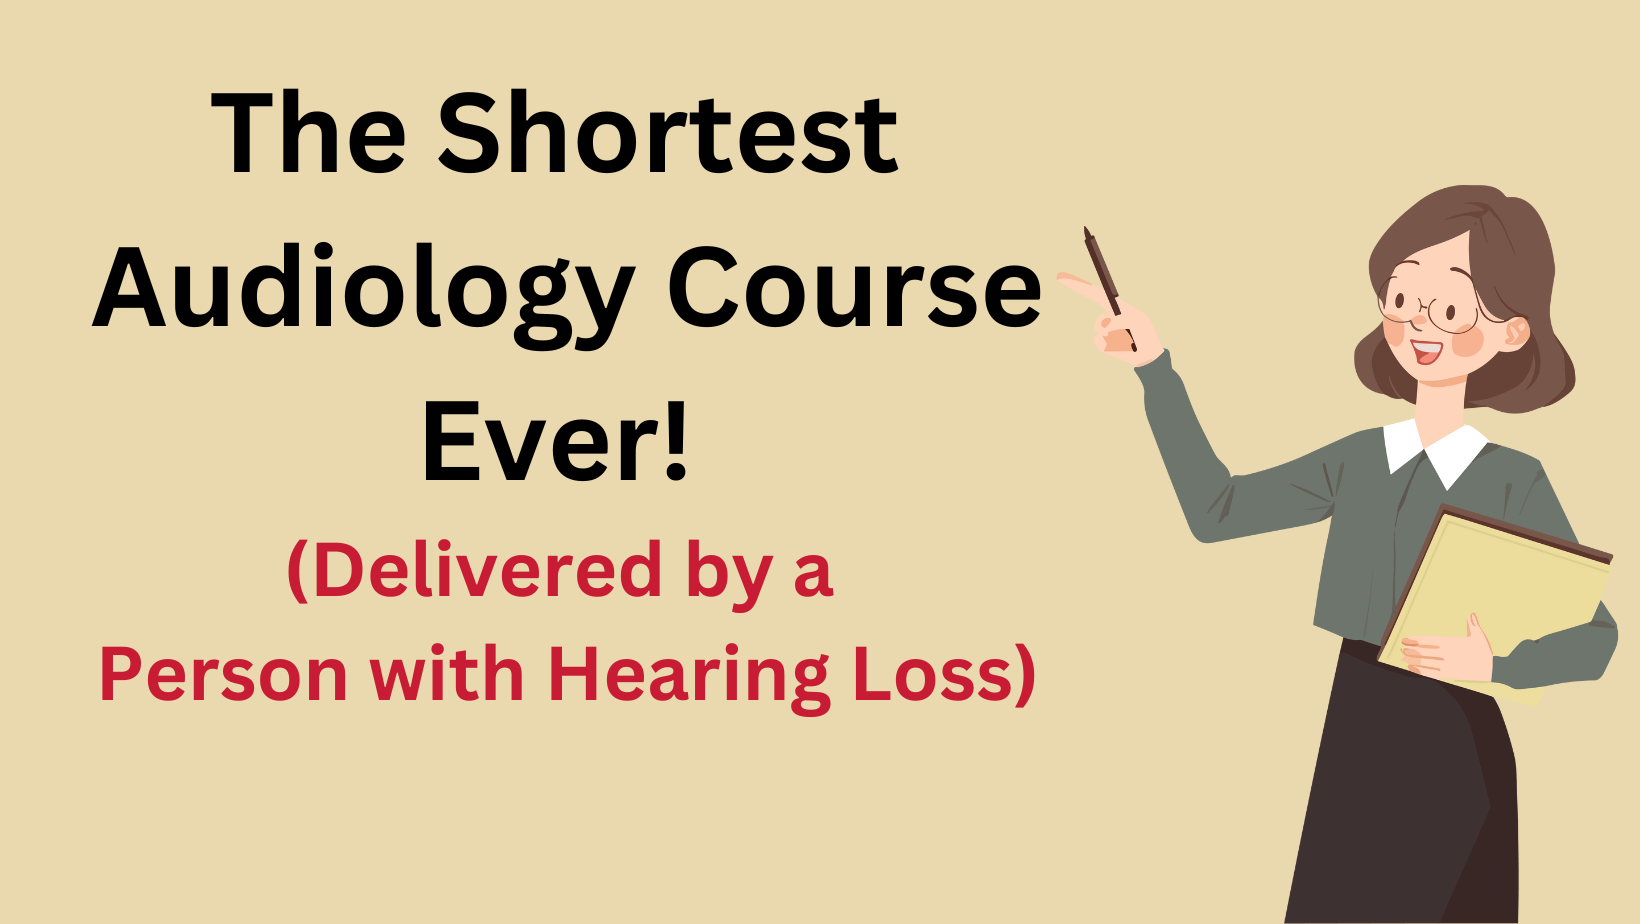 Featured image for “The Shortest Audiology Course Ever”